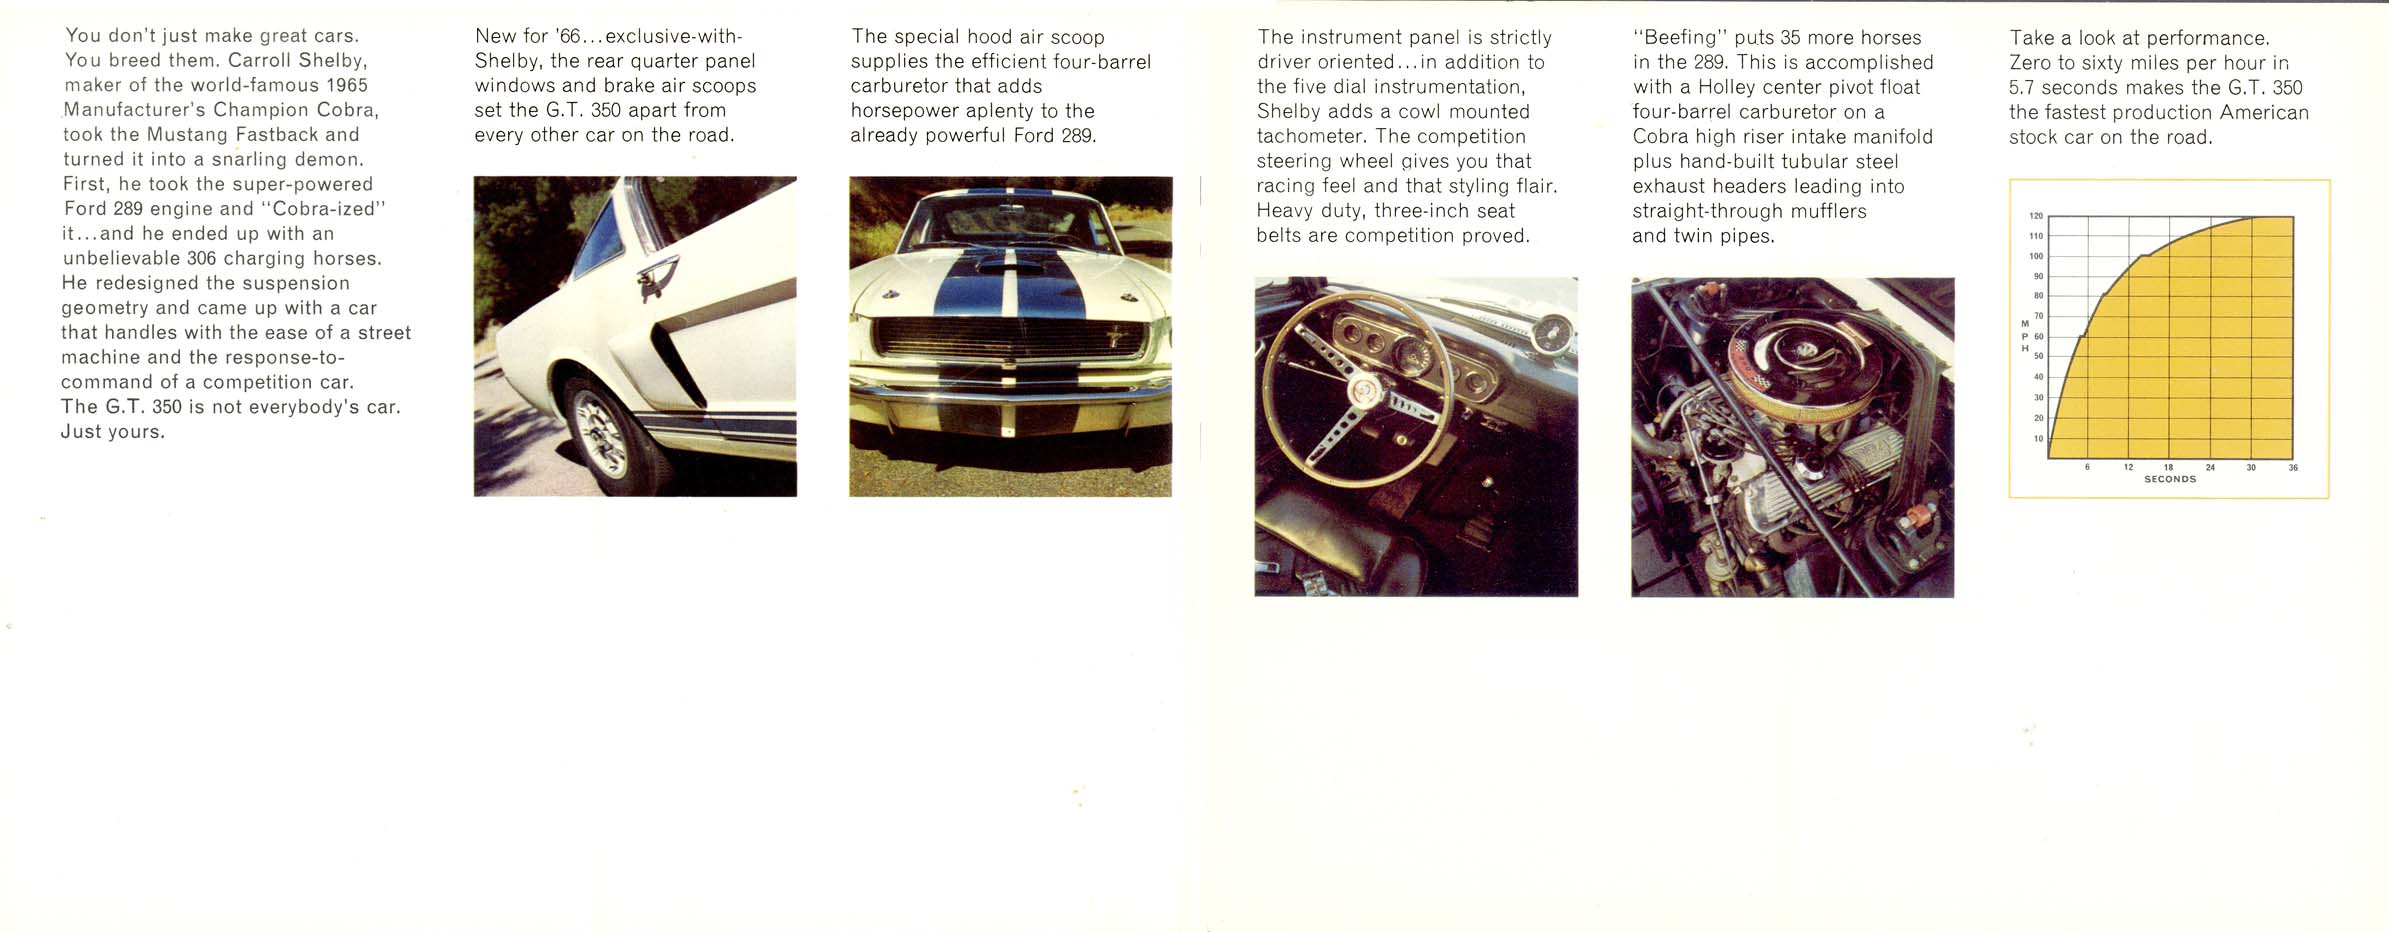 1966 Mustang Shelby GT 350-04-05